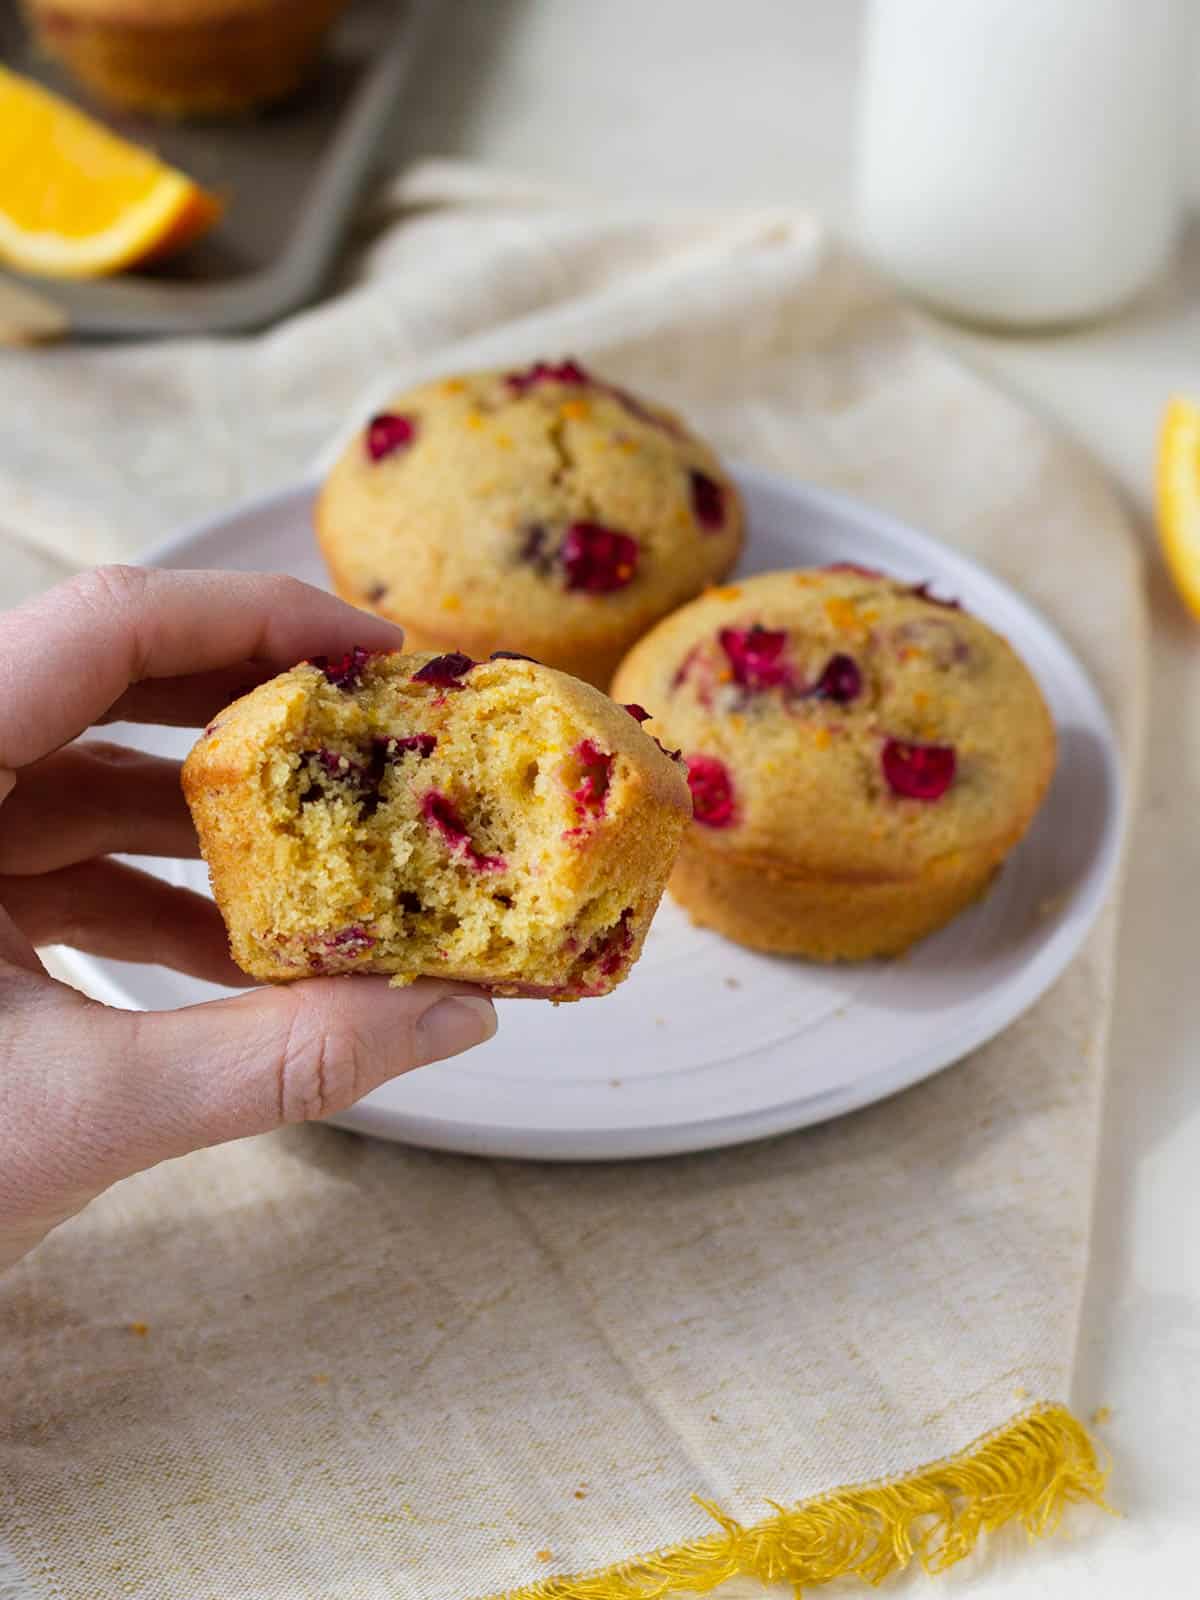 A hand holding a muffins with a bite taken out of it and two muffins on a plate in the background.